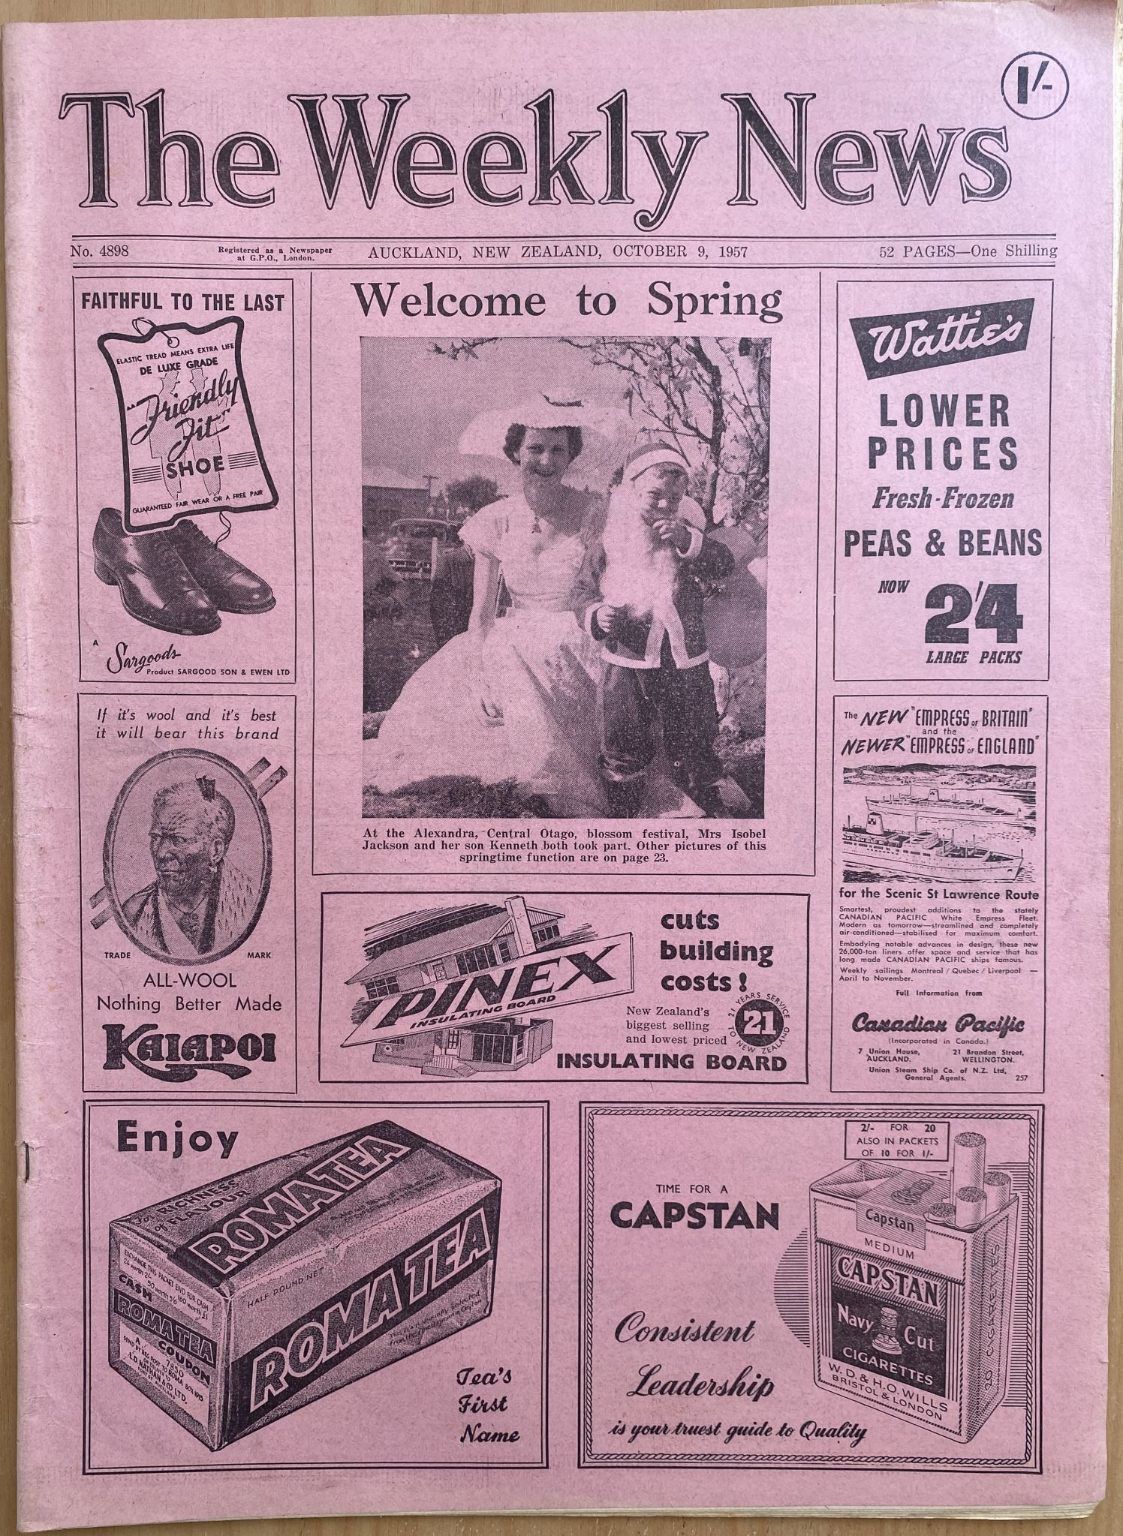 OLD NEWSPAPER: The Weekly News, No. 4898, 9 October 1957